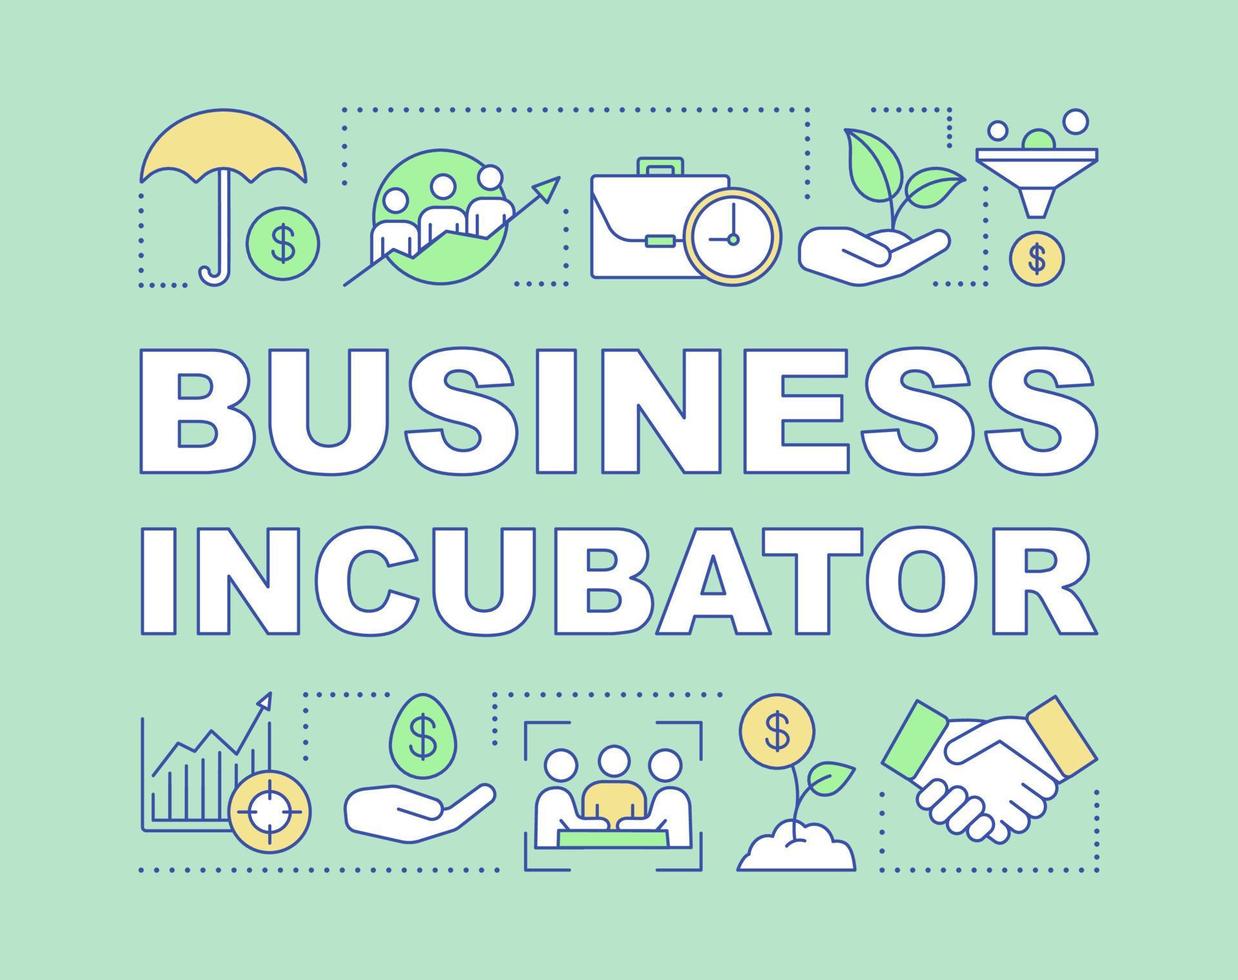 Business incubator word concepts banner. Startup care. Venture investment. Company funding. Presentation, website. Isolated lettering typography idea with linear icons. Vector outline illustration